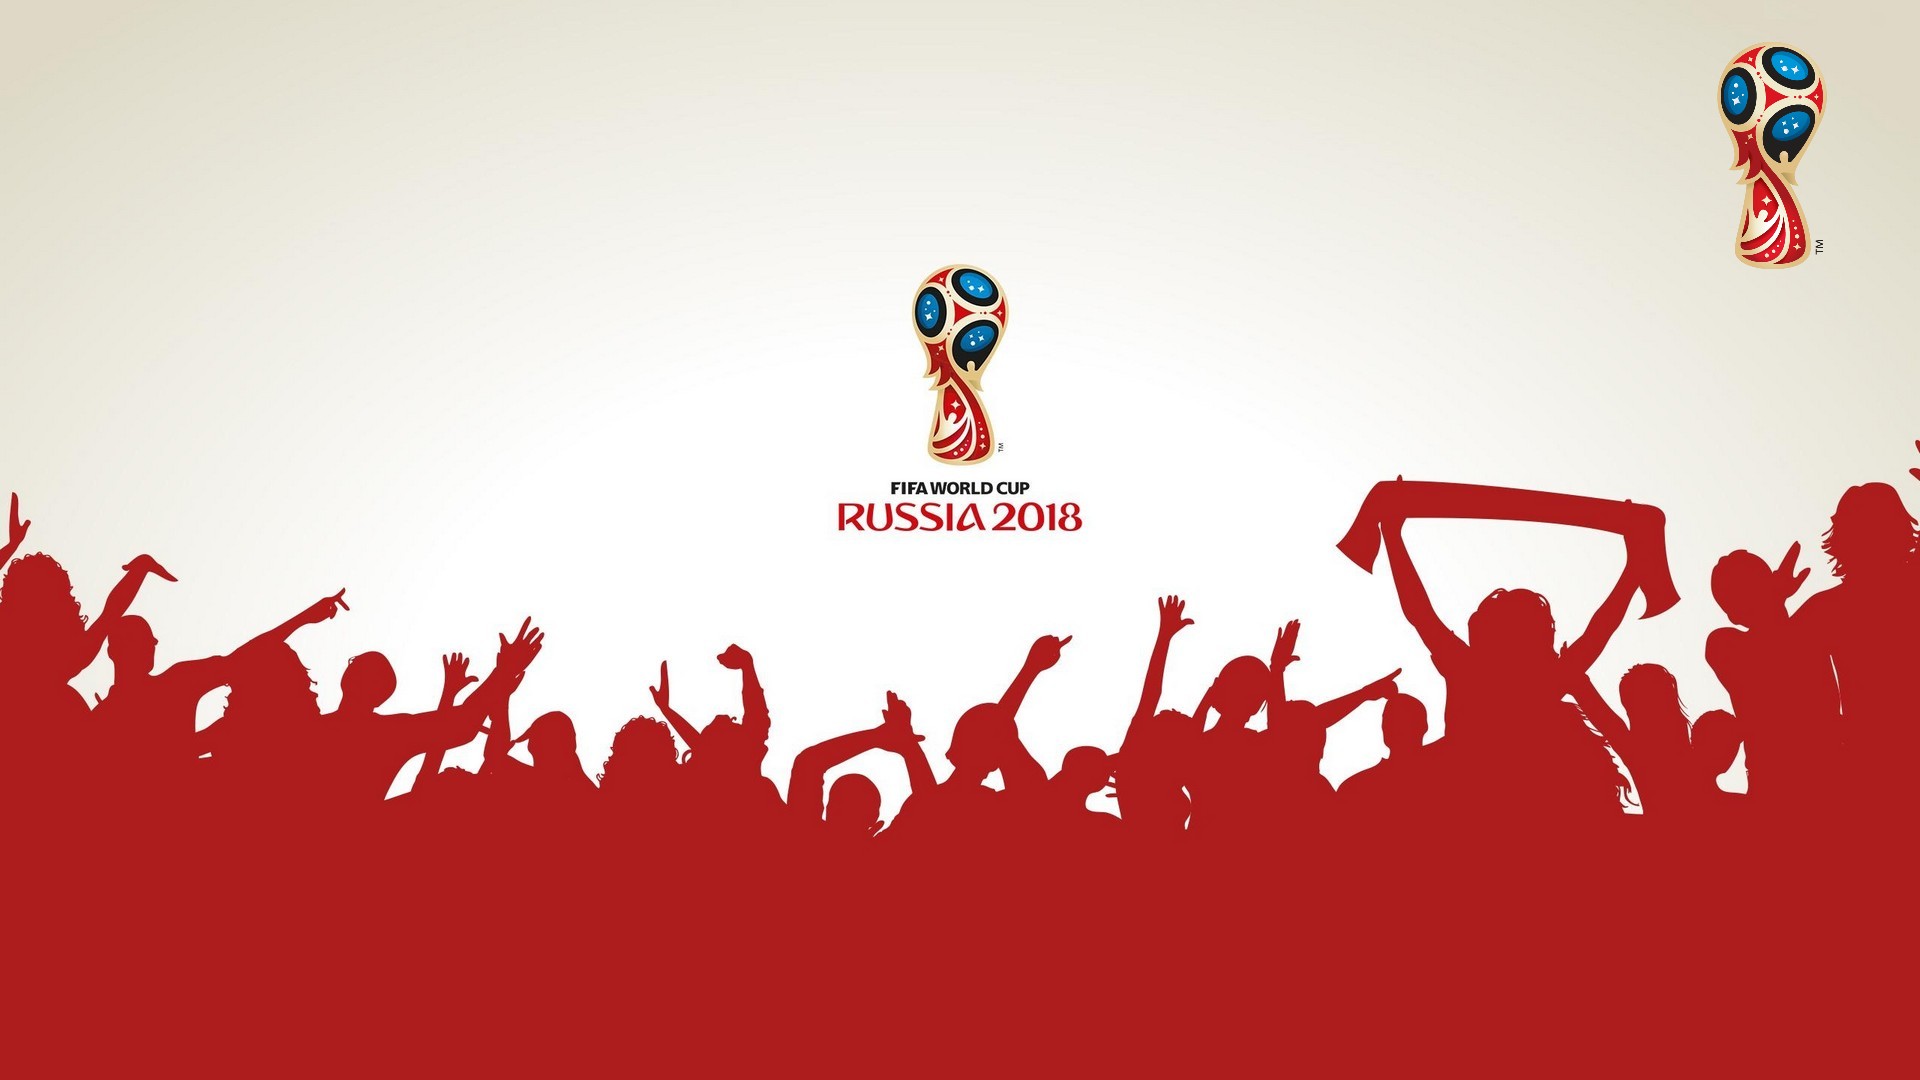 Wallpapers HD FIFA World Cup with resolution 1920x1080 pixel. You can make this wallpaper for your Mac or Windows Desktop Background, iPhone, Android or Tablet and another Smartphone device